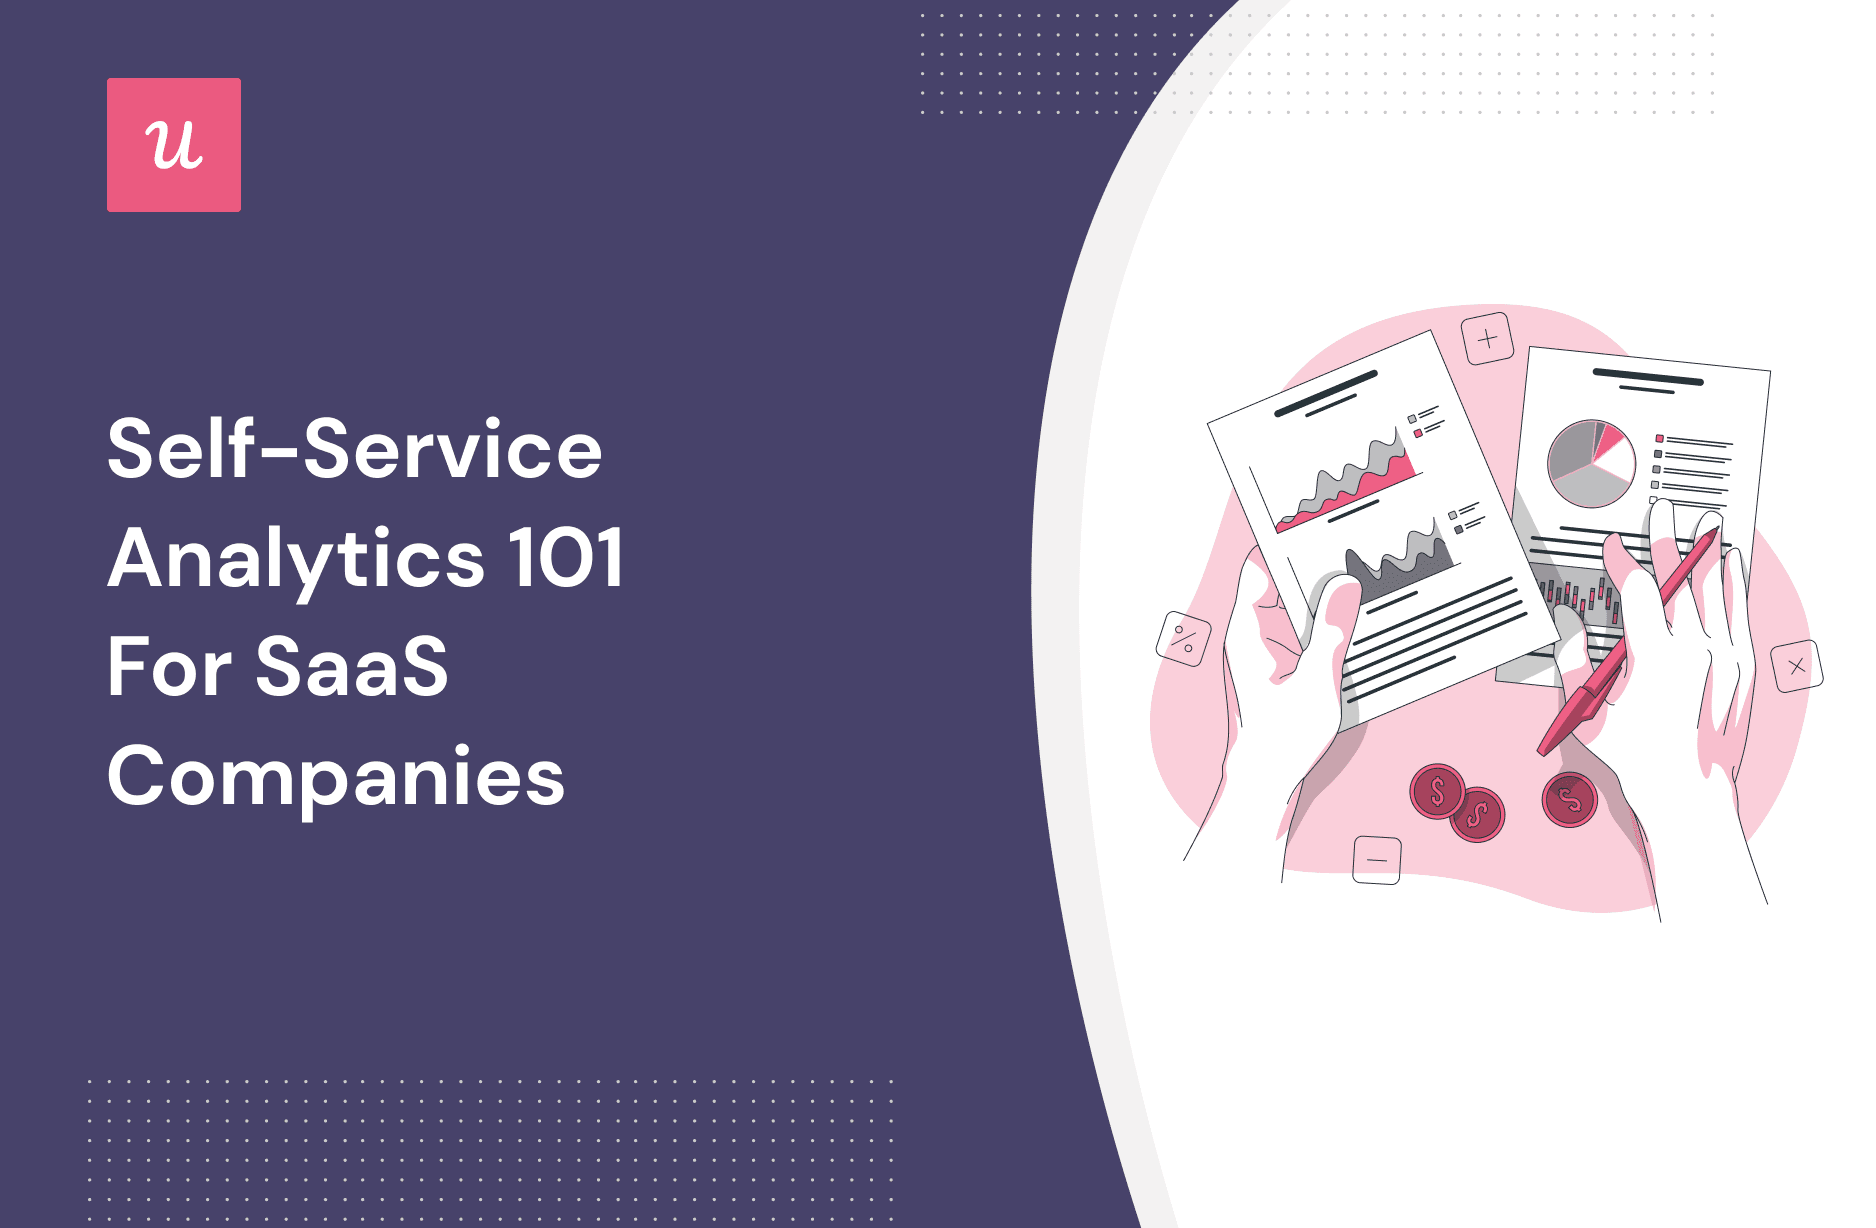 Self-Service Analytics 101 for SaaS Companies cover